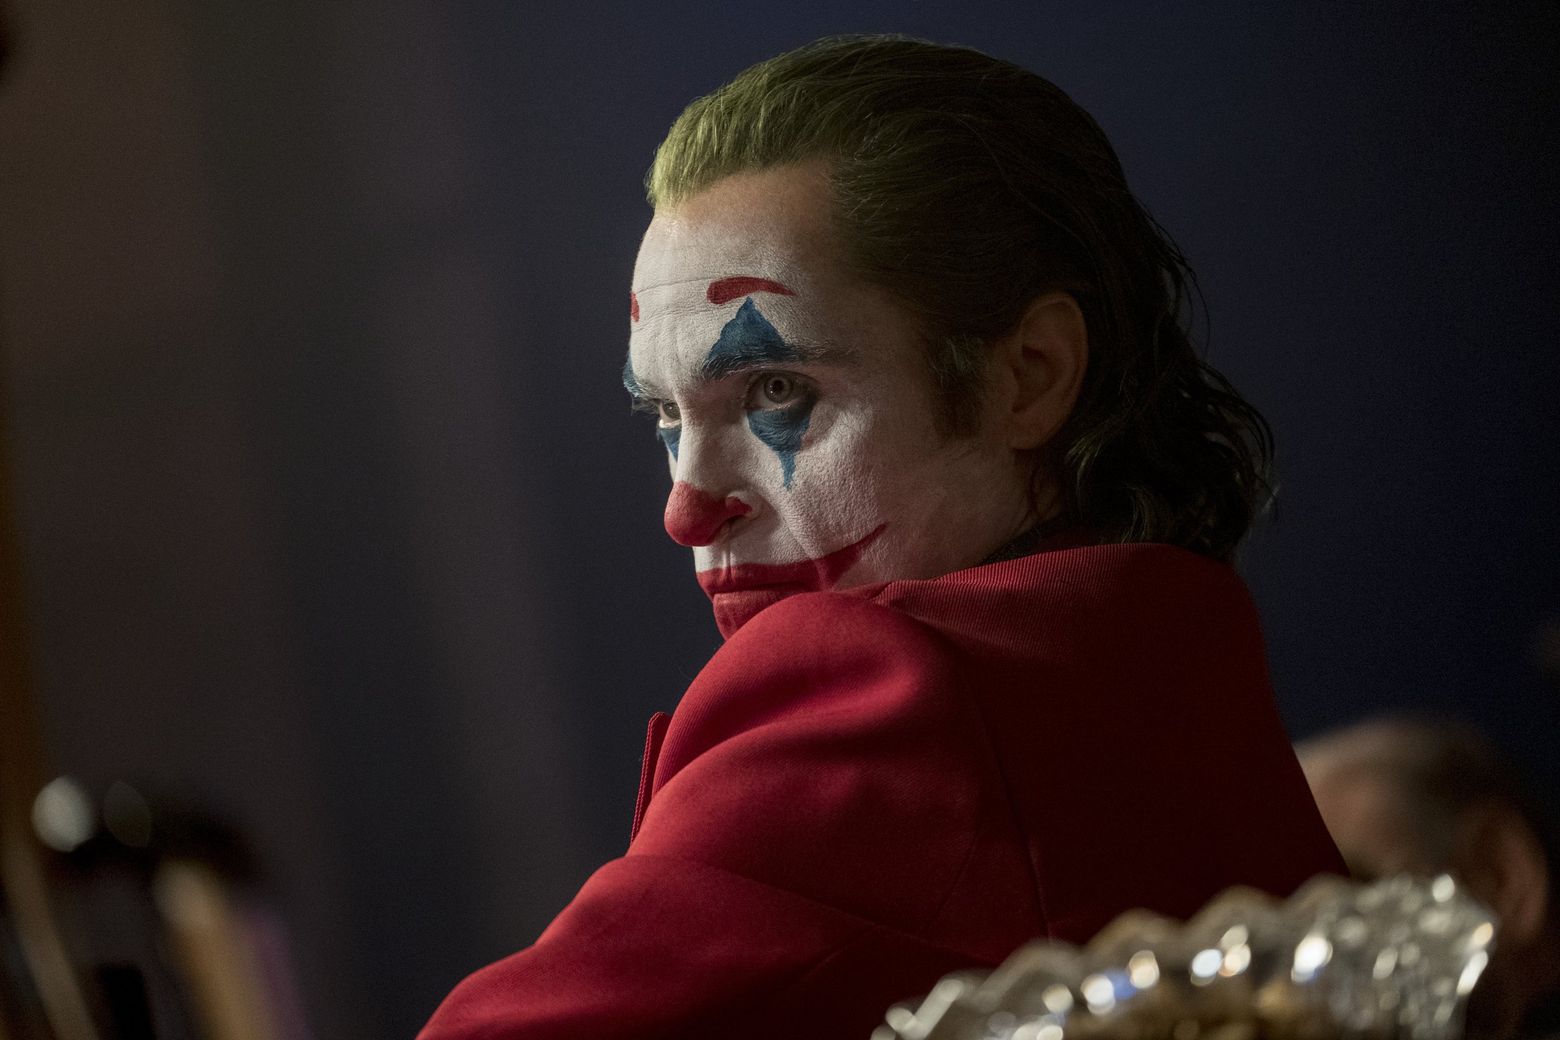 Joker' review: There's nothing funny about this very dark origin story  starring Joaquin Phoenix | The Seattle Times